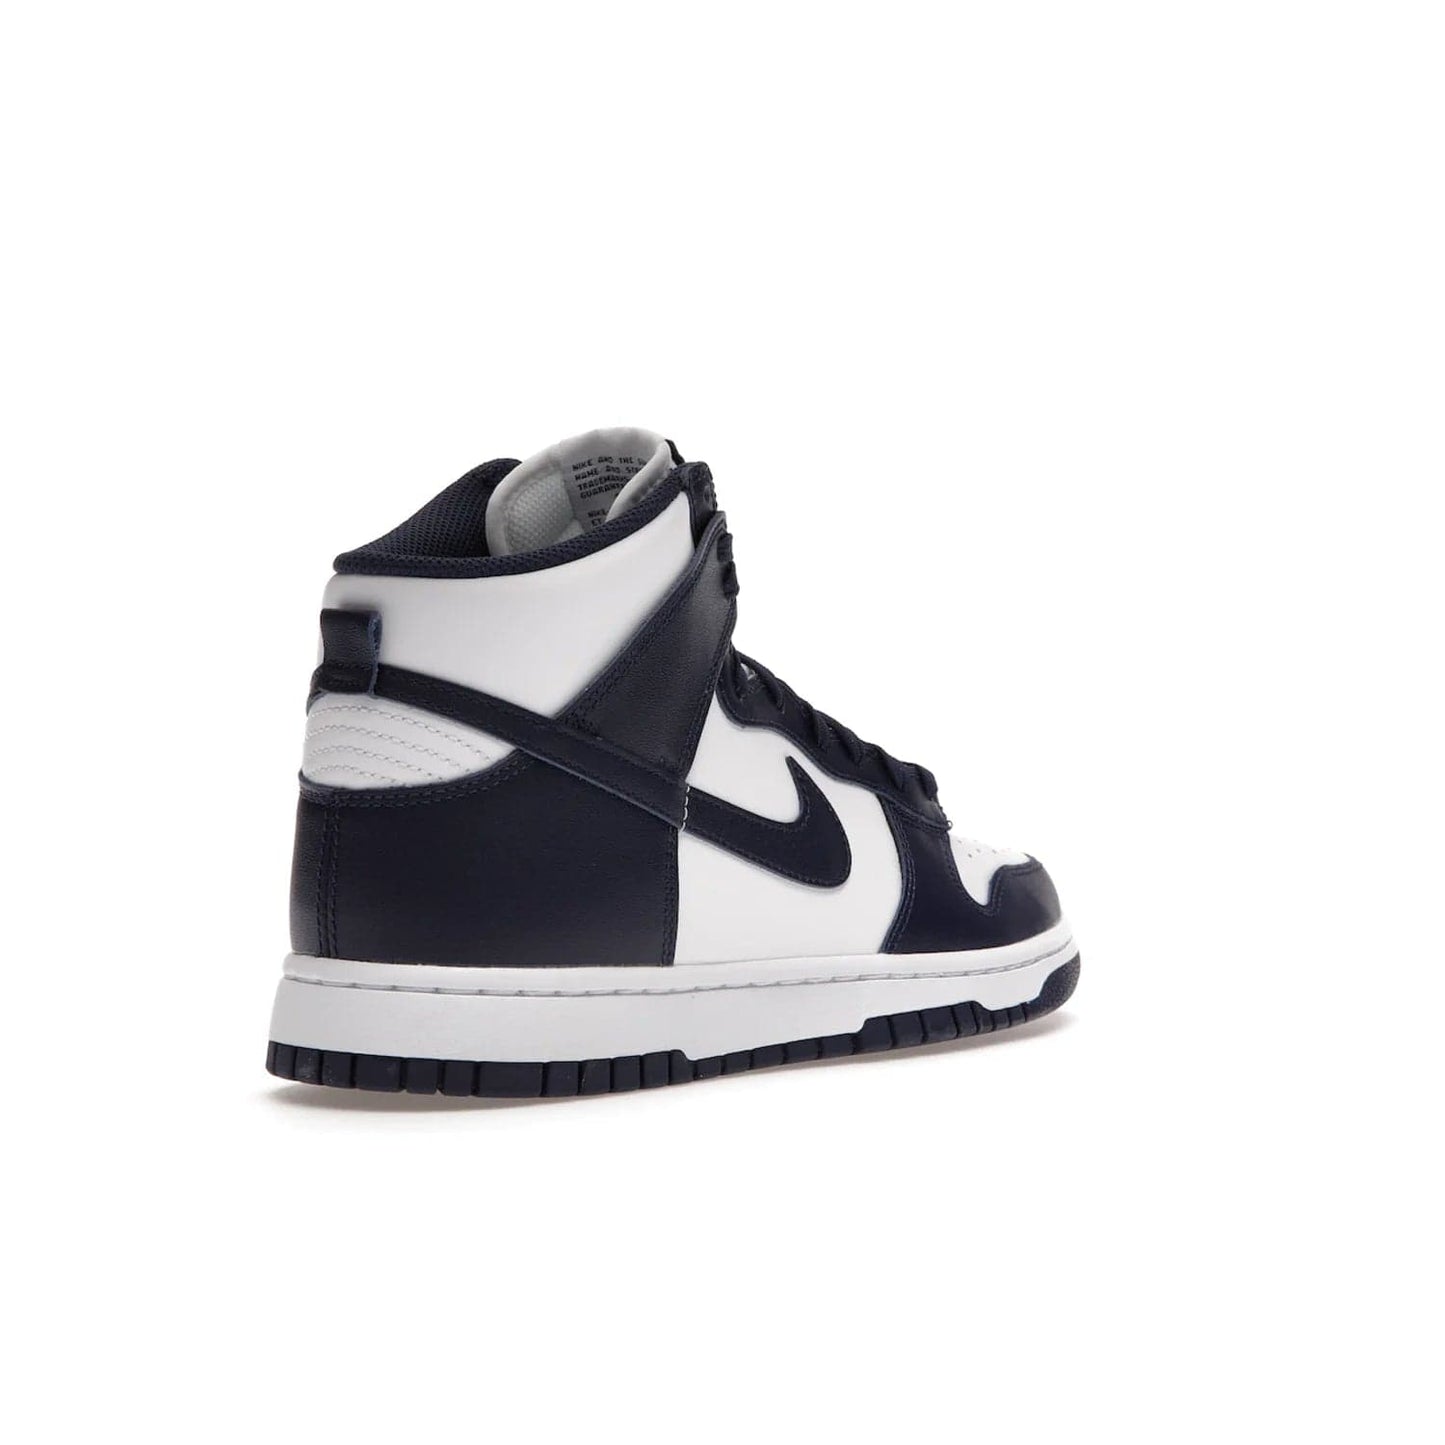 Nike Dunk High Championship Navy - Image 32 - Only at www.BallersClubKickz.com - Classic athletic style meets striking color-blocking on the Nike Dunk High Championship Navy. A white leather upper with Championship Navy overlays creates a retro look with a woven tongue label and sole. Unleash your inner champion with the Nike Dunk High Championship Navy.